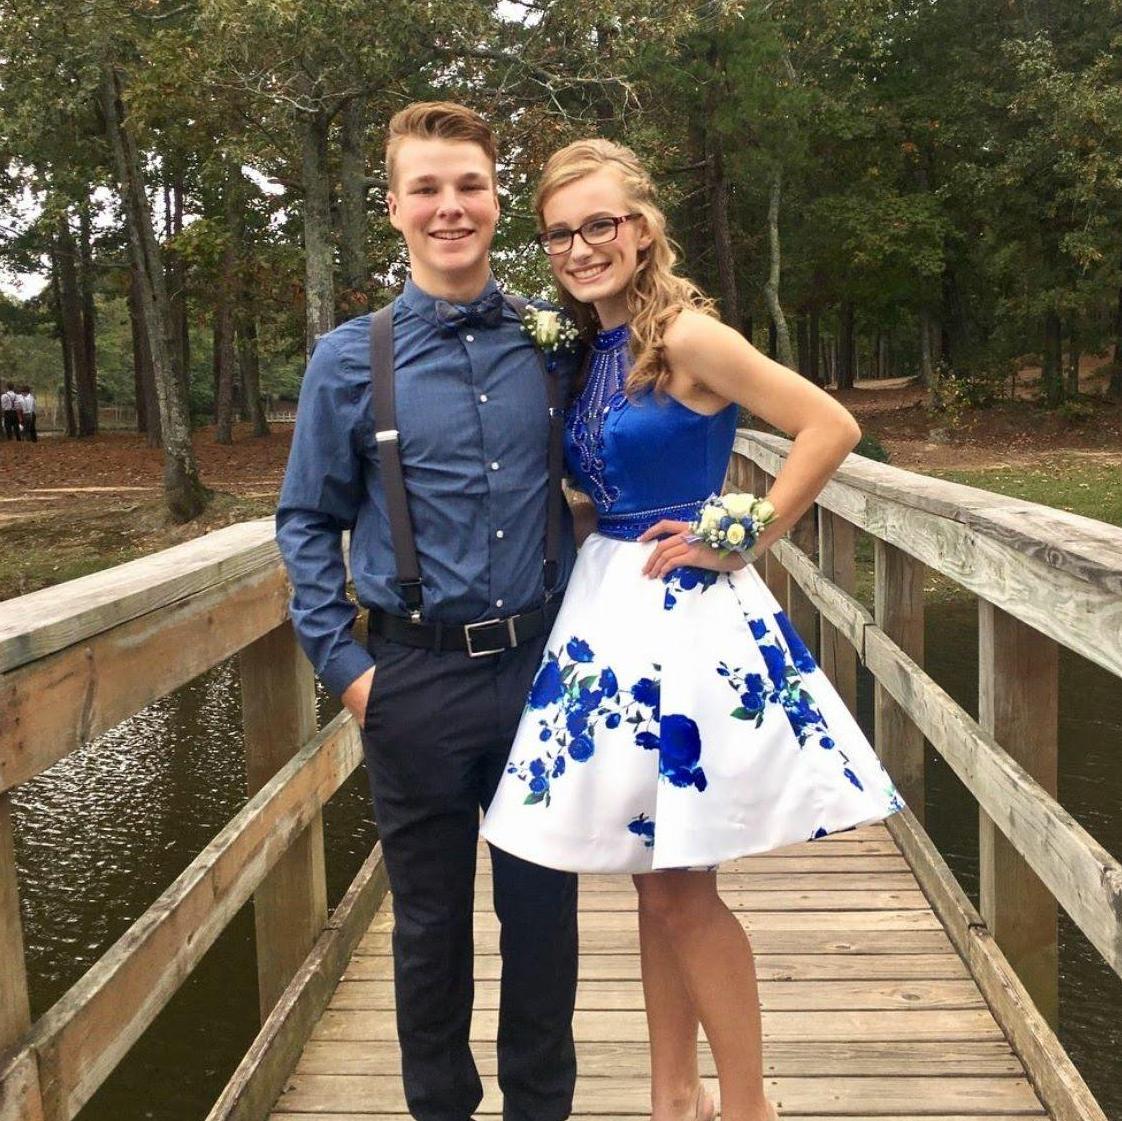 First homecoming dance together junior year!